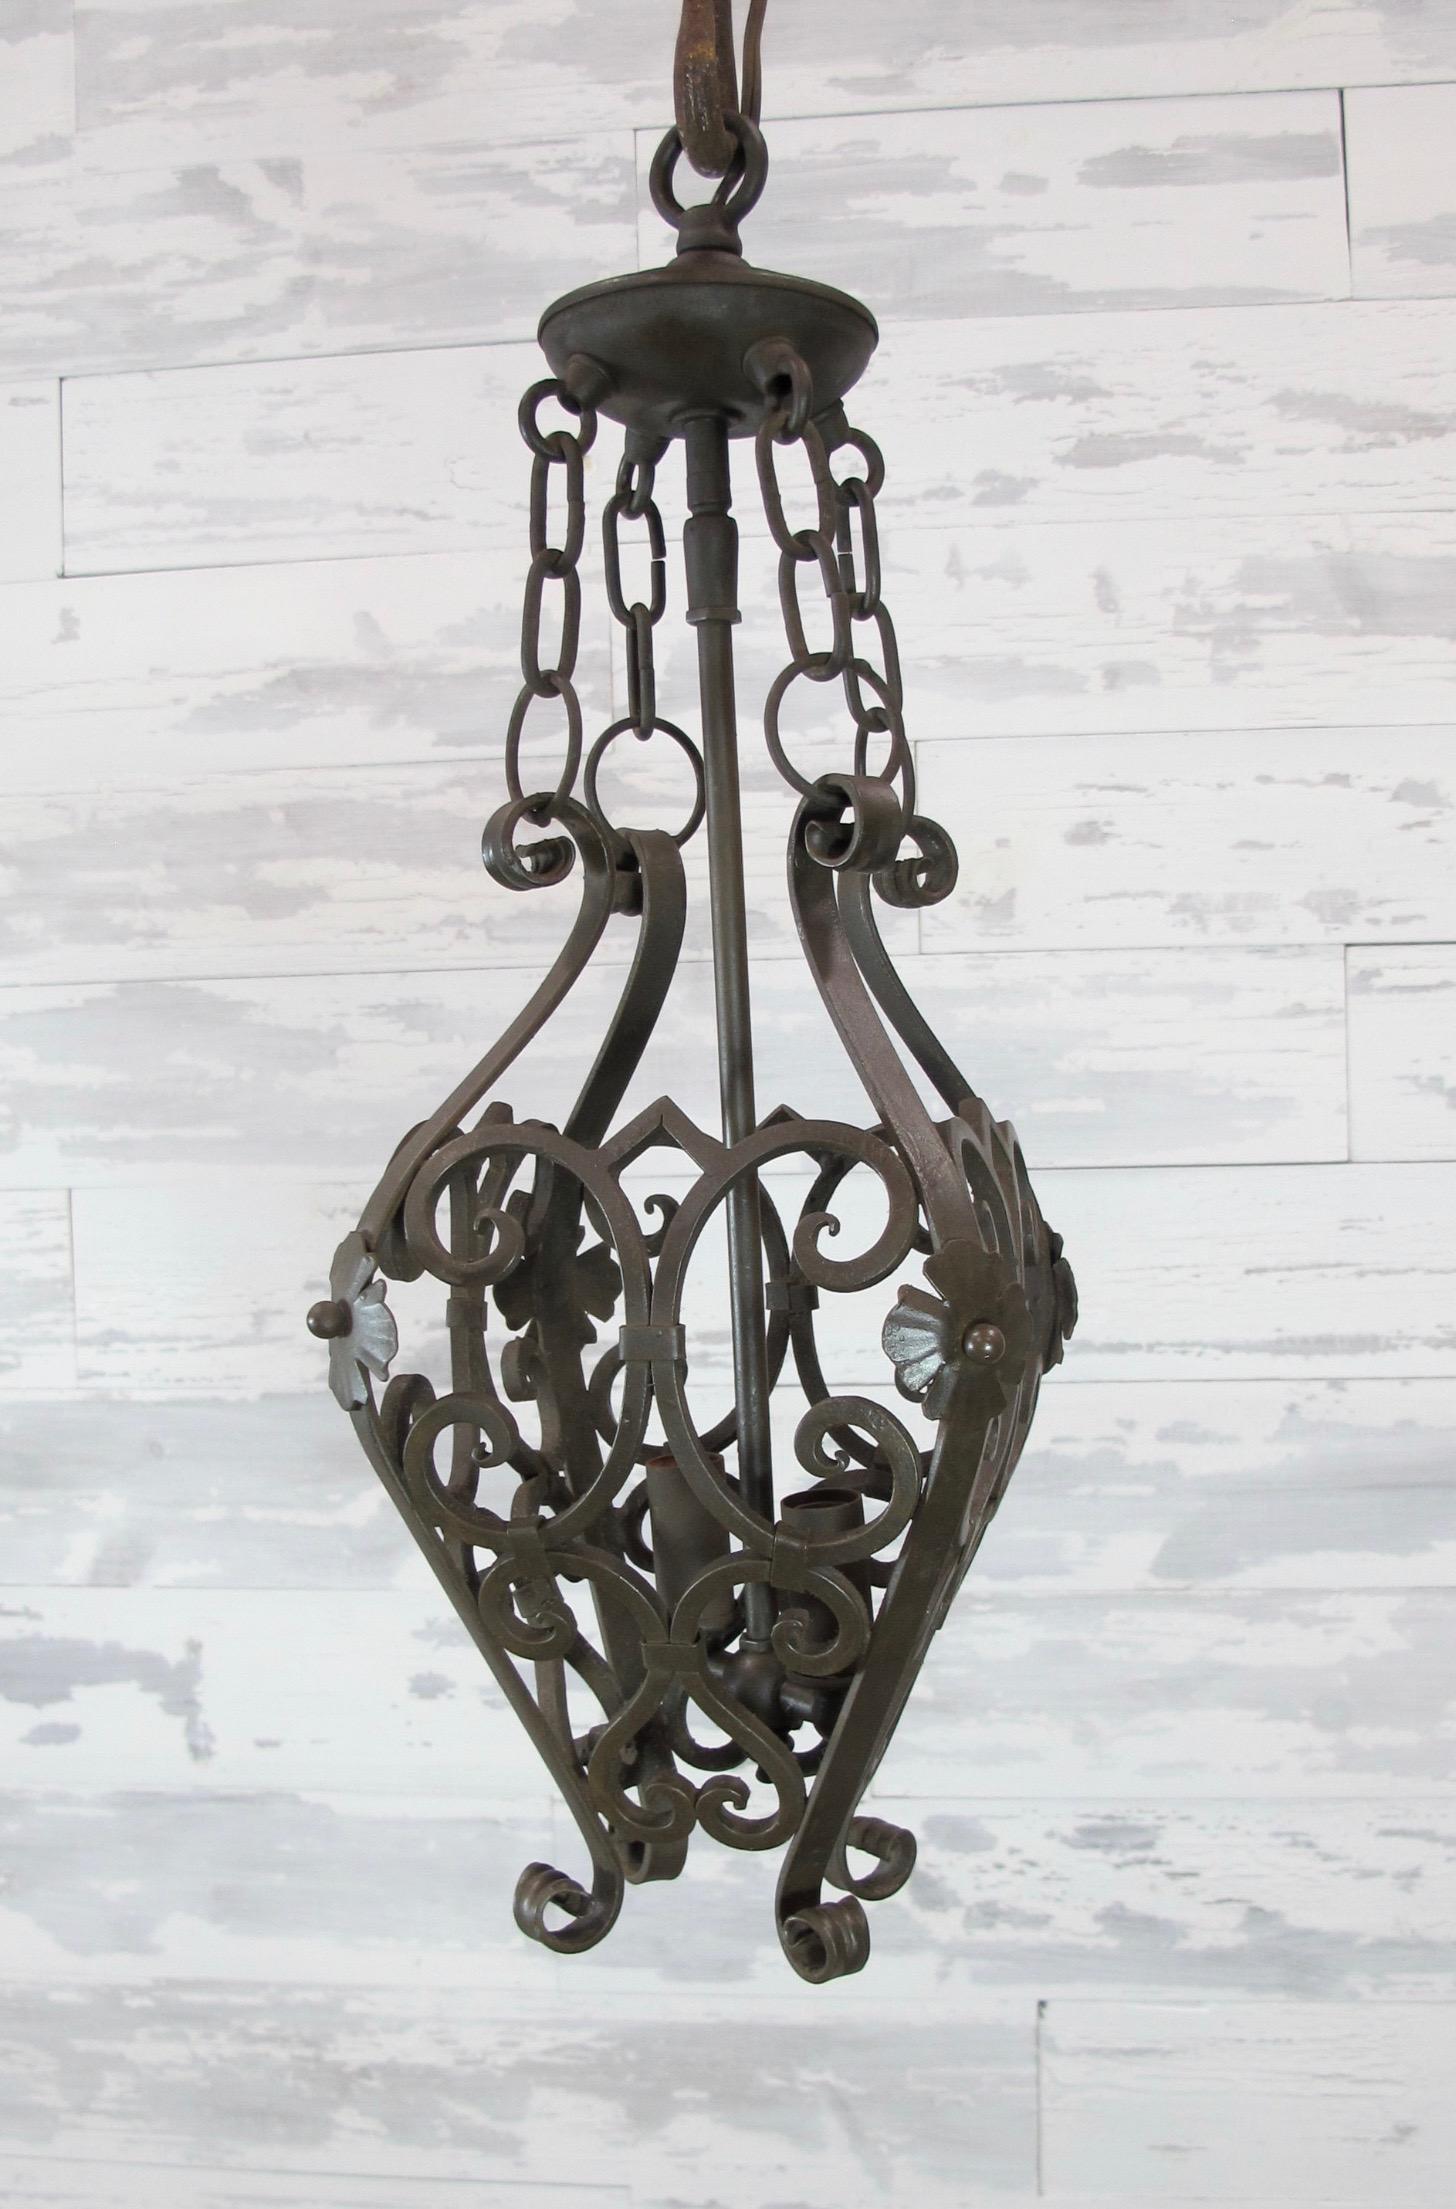 Part of the chandelier product line, the 